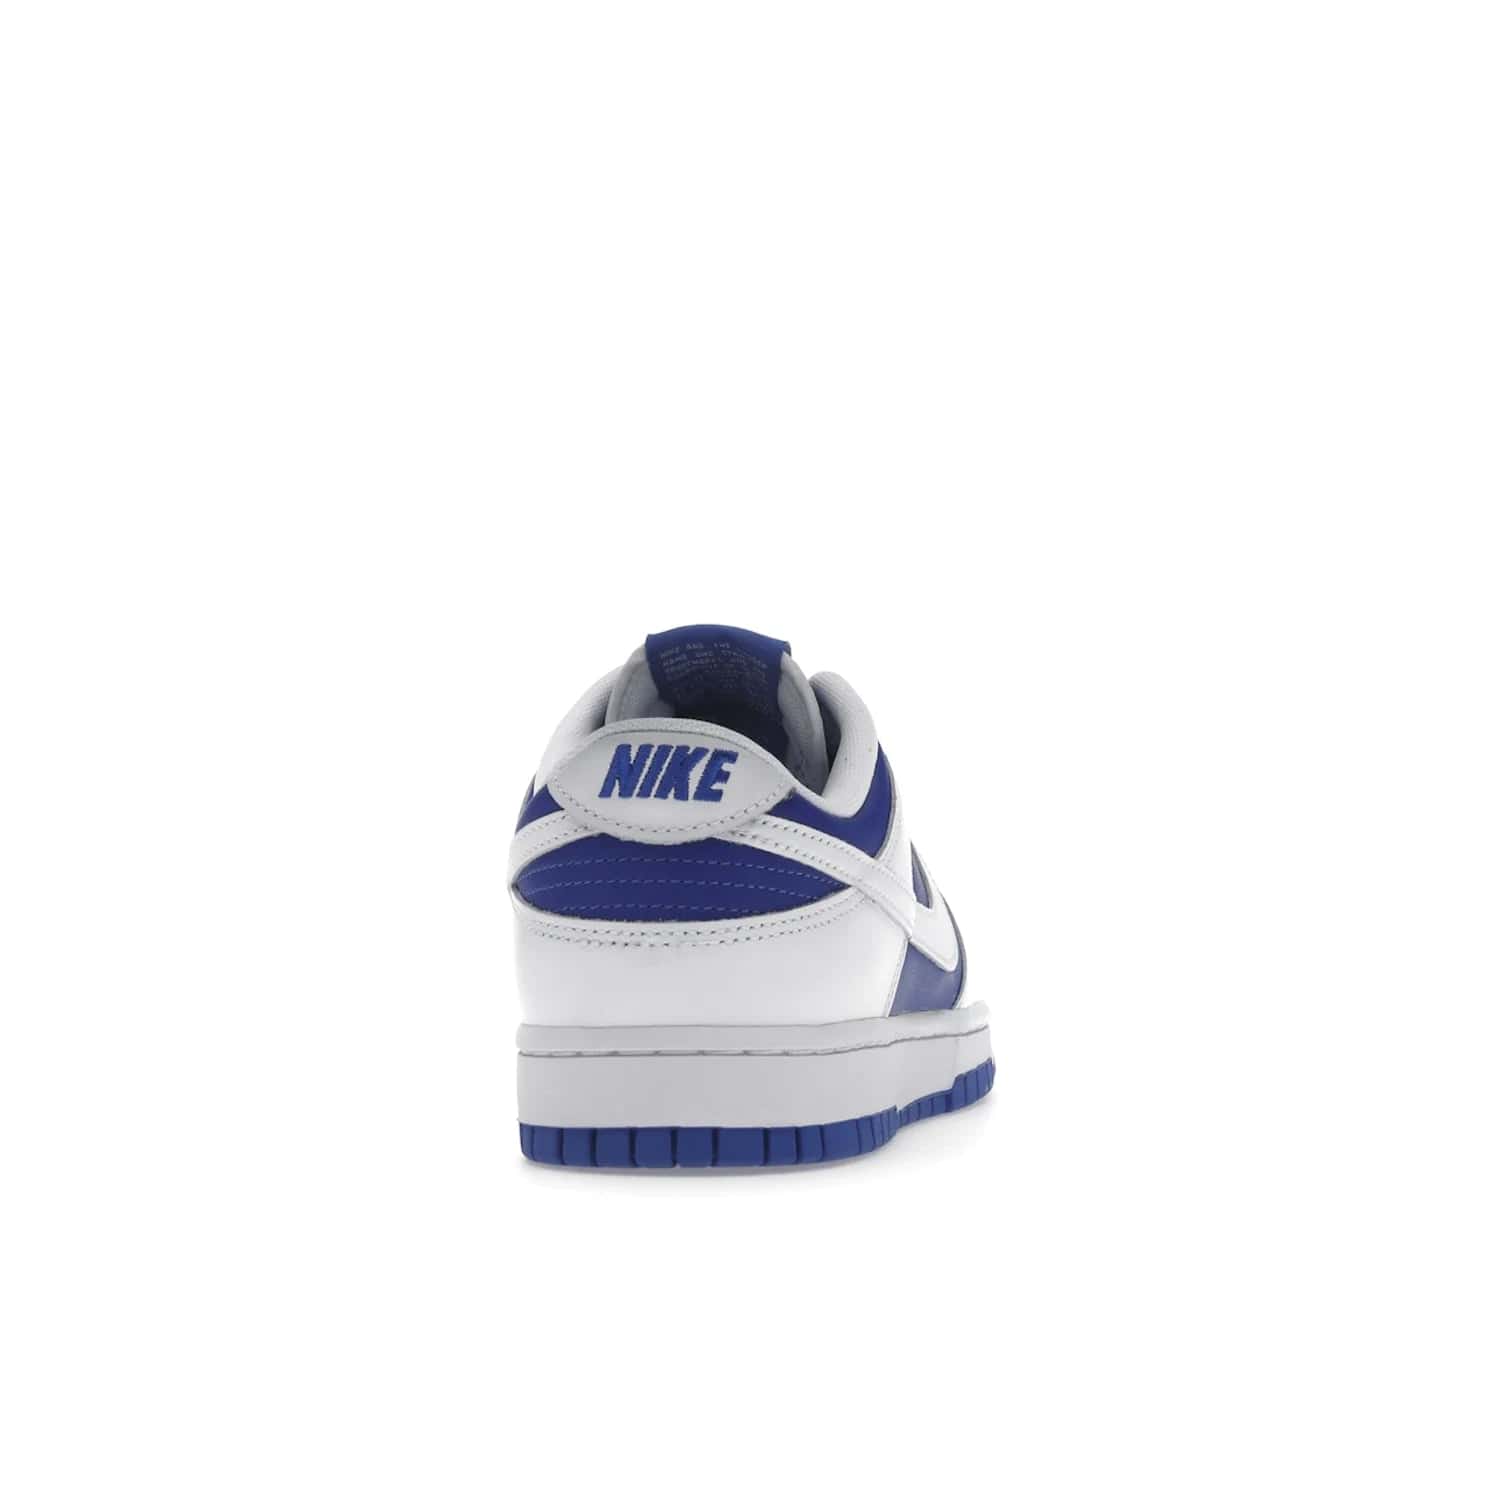 Nike Dunk Low Racer Blue White - Image 29 - Only at www.BallersClubKickz.com - Sleek Racer Blue leather upper and white leather overlays make up the Nike Dunk Low Racer Blue White. Woven tag and heel embroidery for a 1985 Dunk look with a matching EVA foam sole completes the classic colorway.